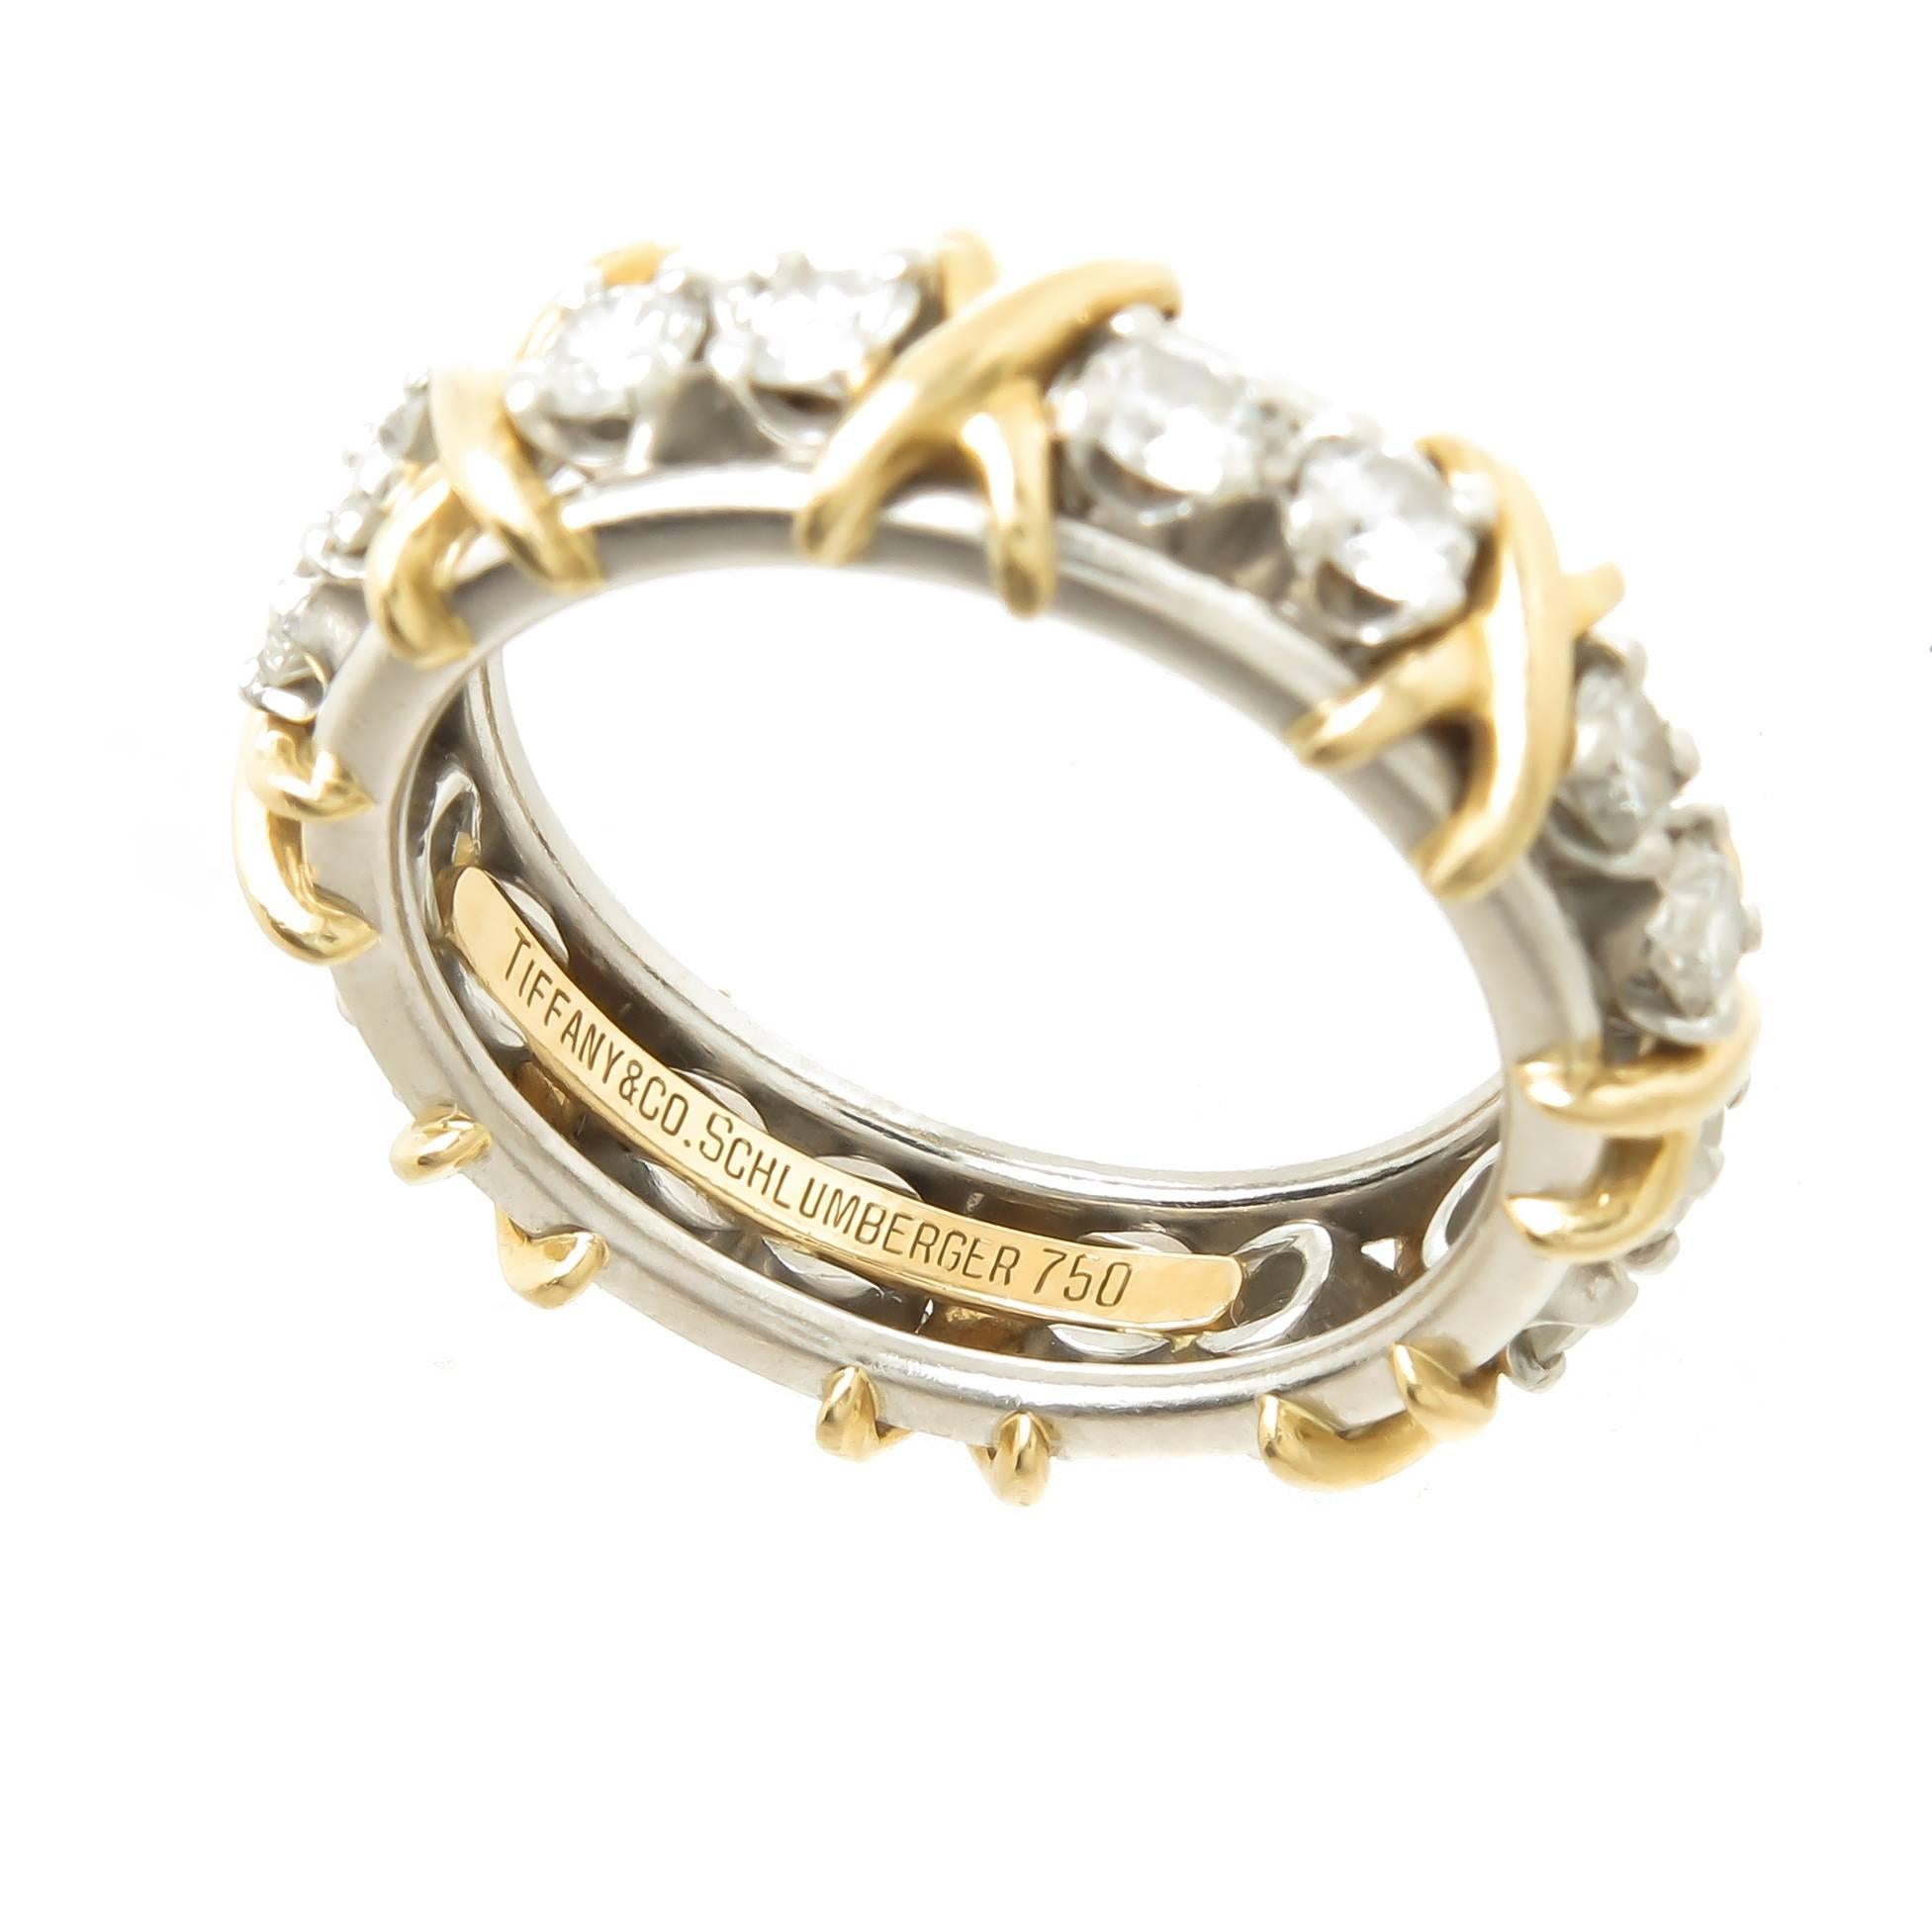 Jean Schlumber for Tiffany & Company, Platinum and 18k Yellow Gold X Band Ring. Set with 18 Round Brilliant cut Diamonds totaling 1.32 Carats and grading as G in color and VS in Clarity. measures 5 MM wide and is a finger size 6 1/2.